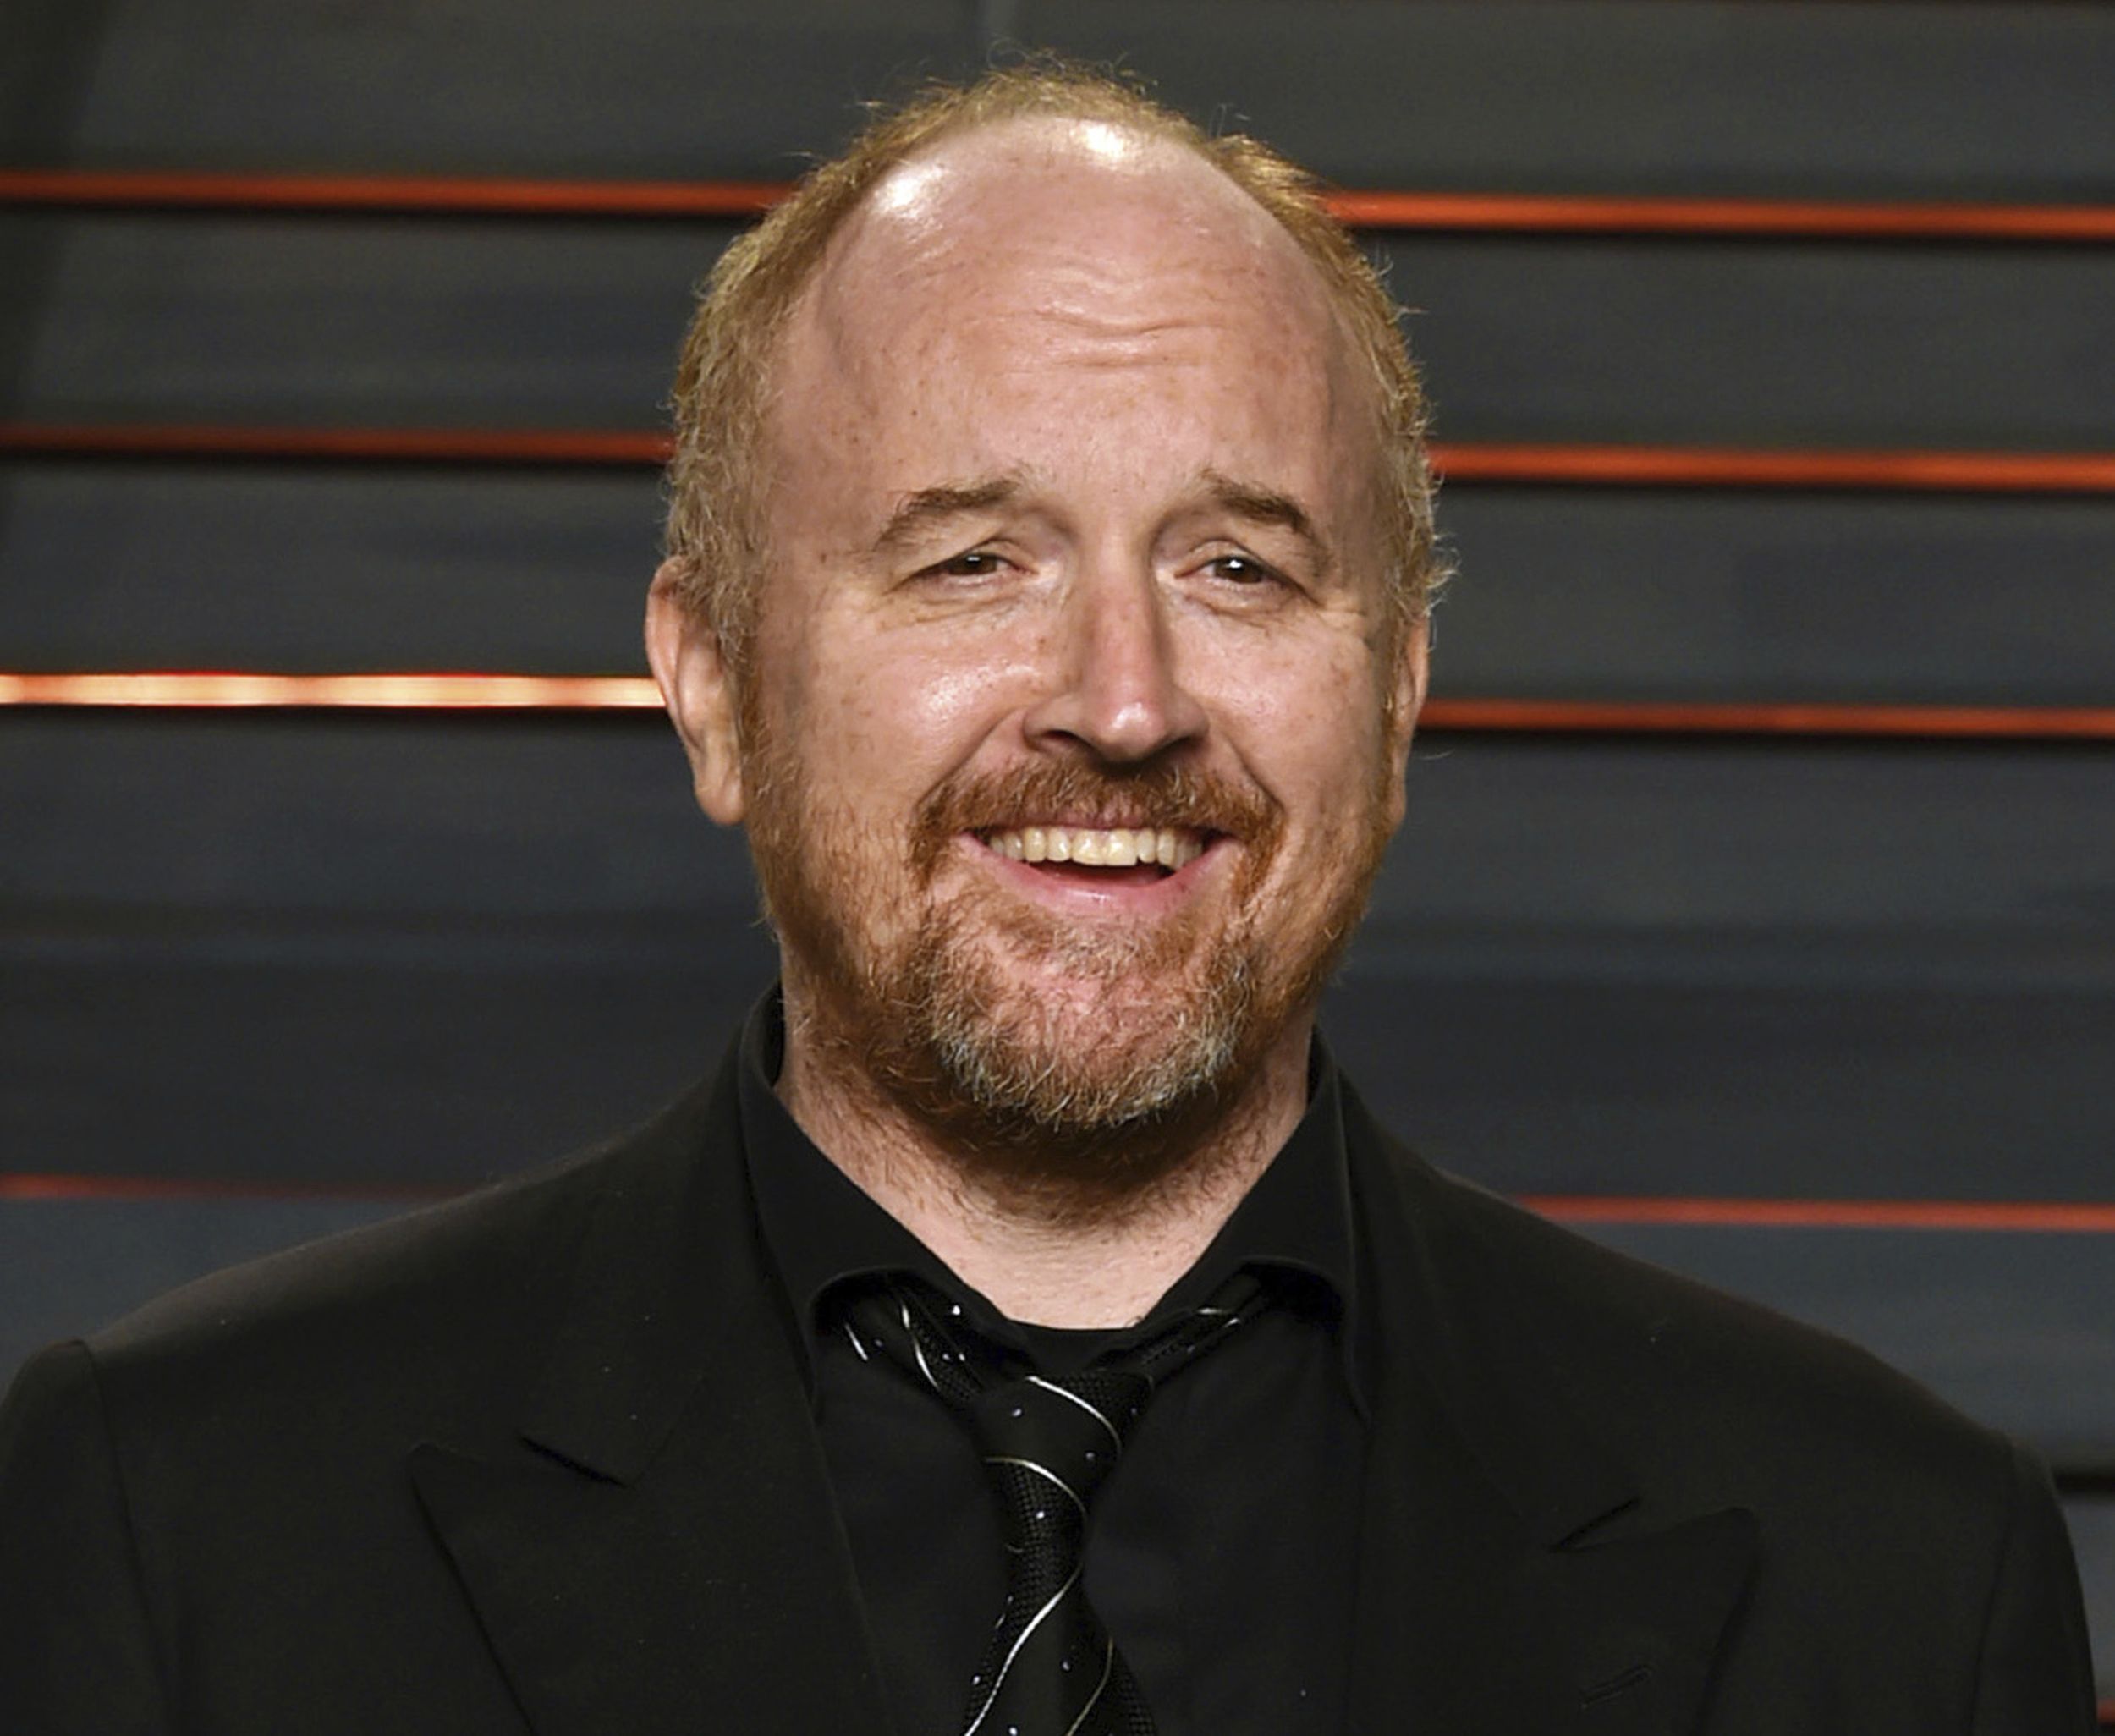 Louis C.K. gets support from Chris Rock at latest stand-up gig